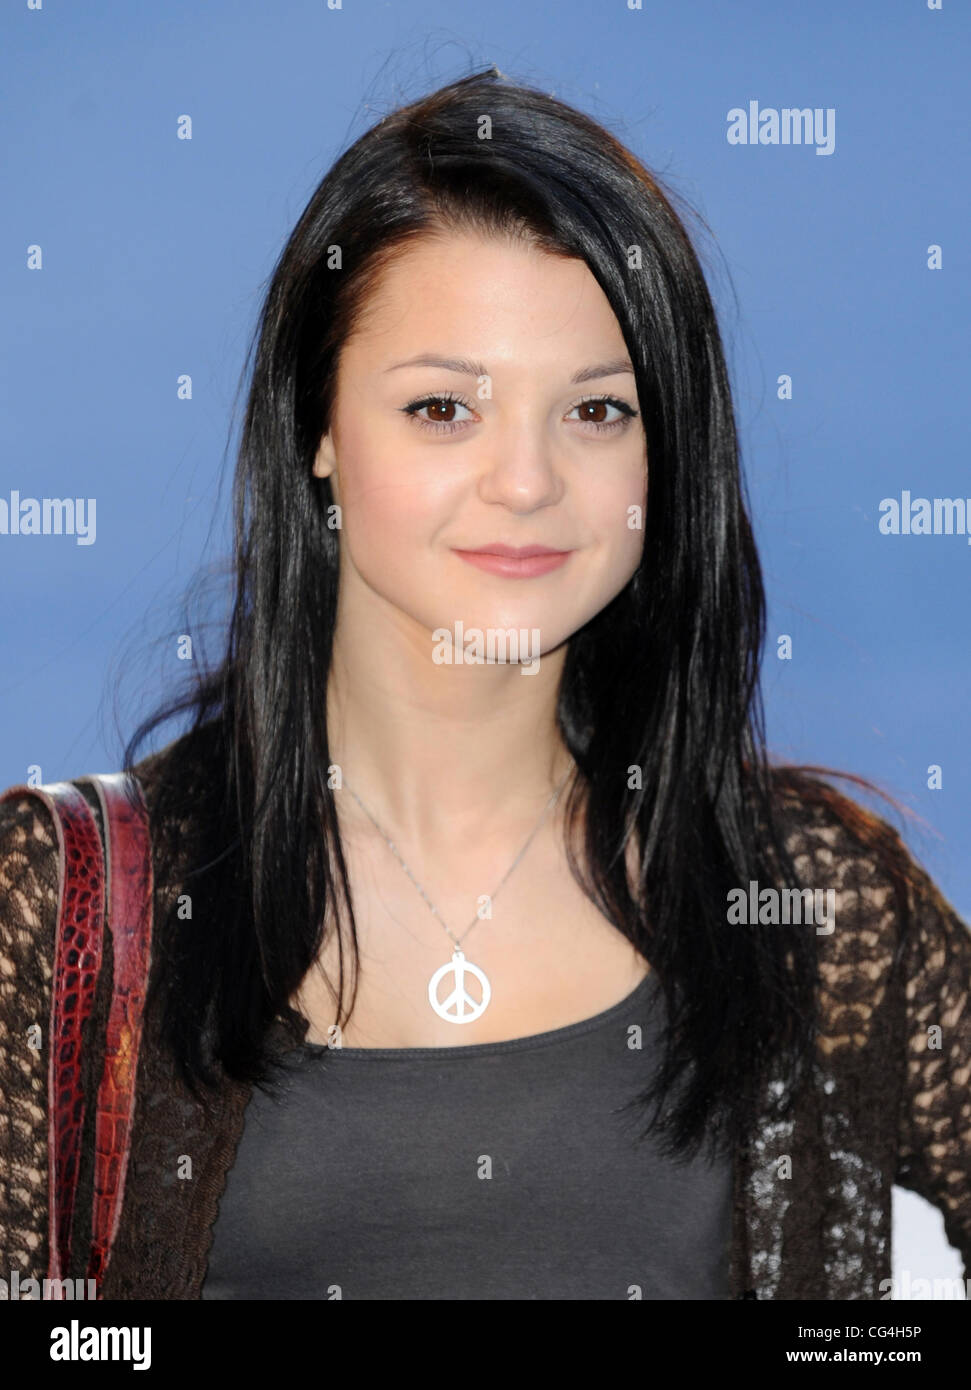 Kathryn Prescott  'Charlie St. Cloud' - UK film premiere held at the Empire Leicester Square.  London, England - 16.09.10 Stock Photo